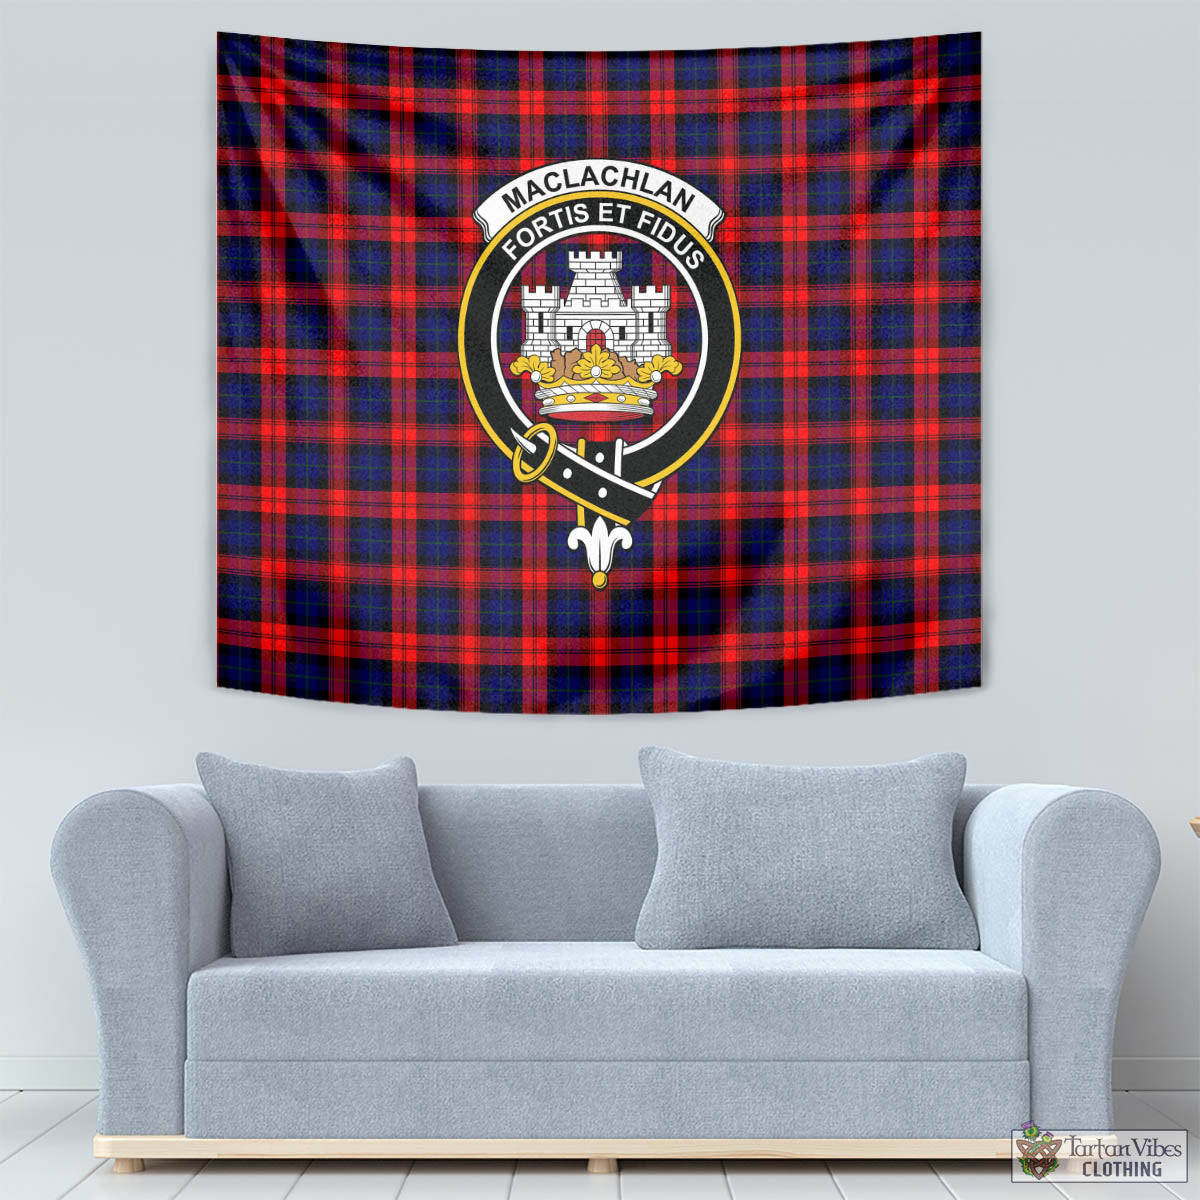 Tartan Vibes Clothing MacLachlan Modern Tartan Tapestry Wall Hanging and Home Decor for Room with Family Crest